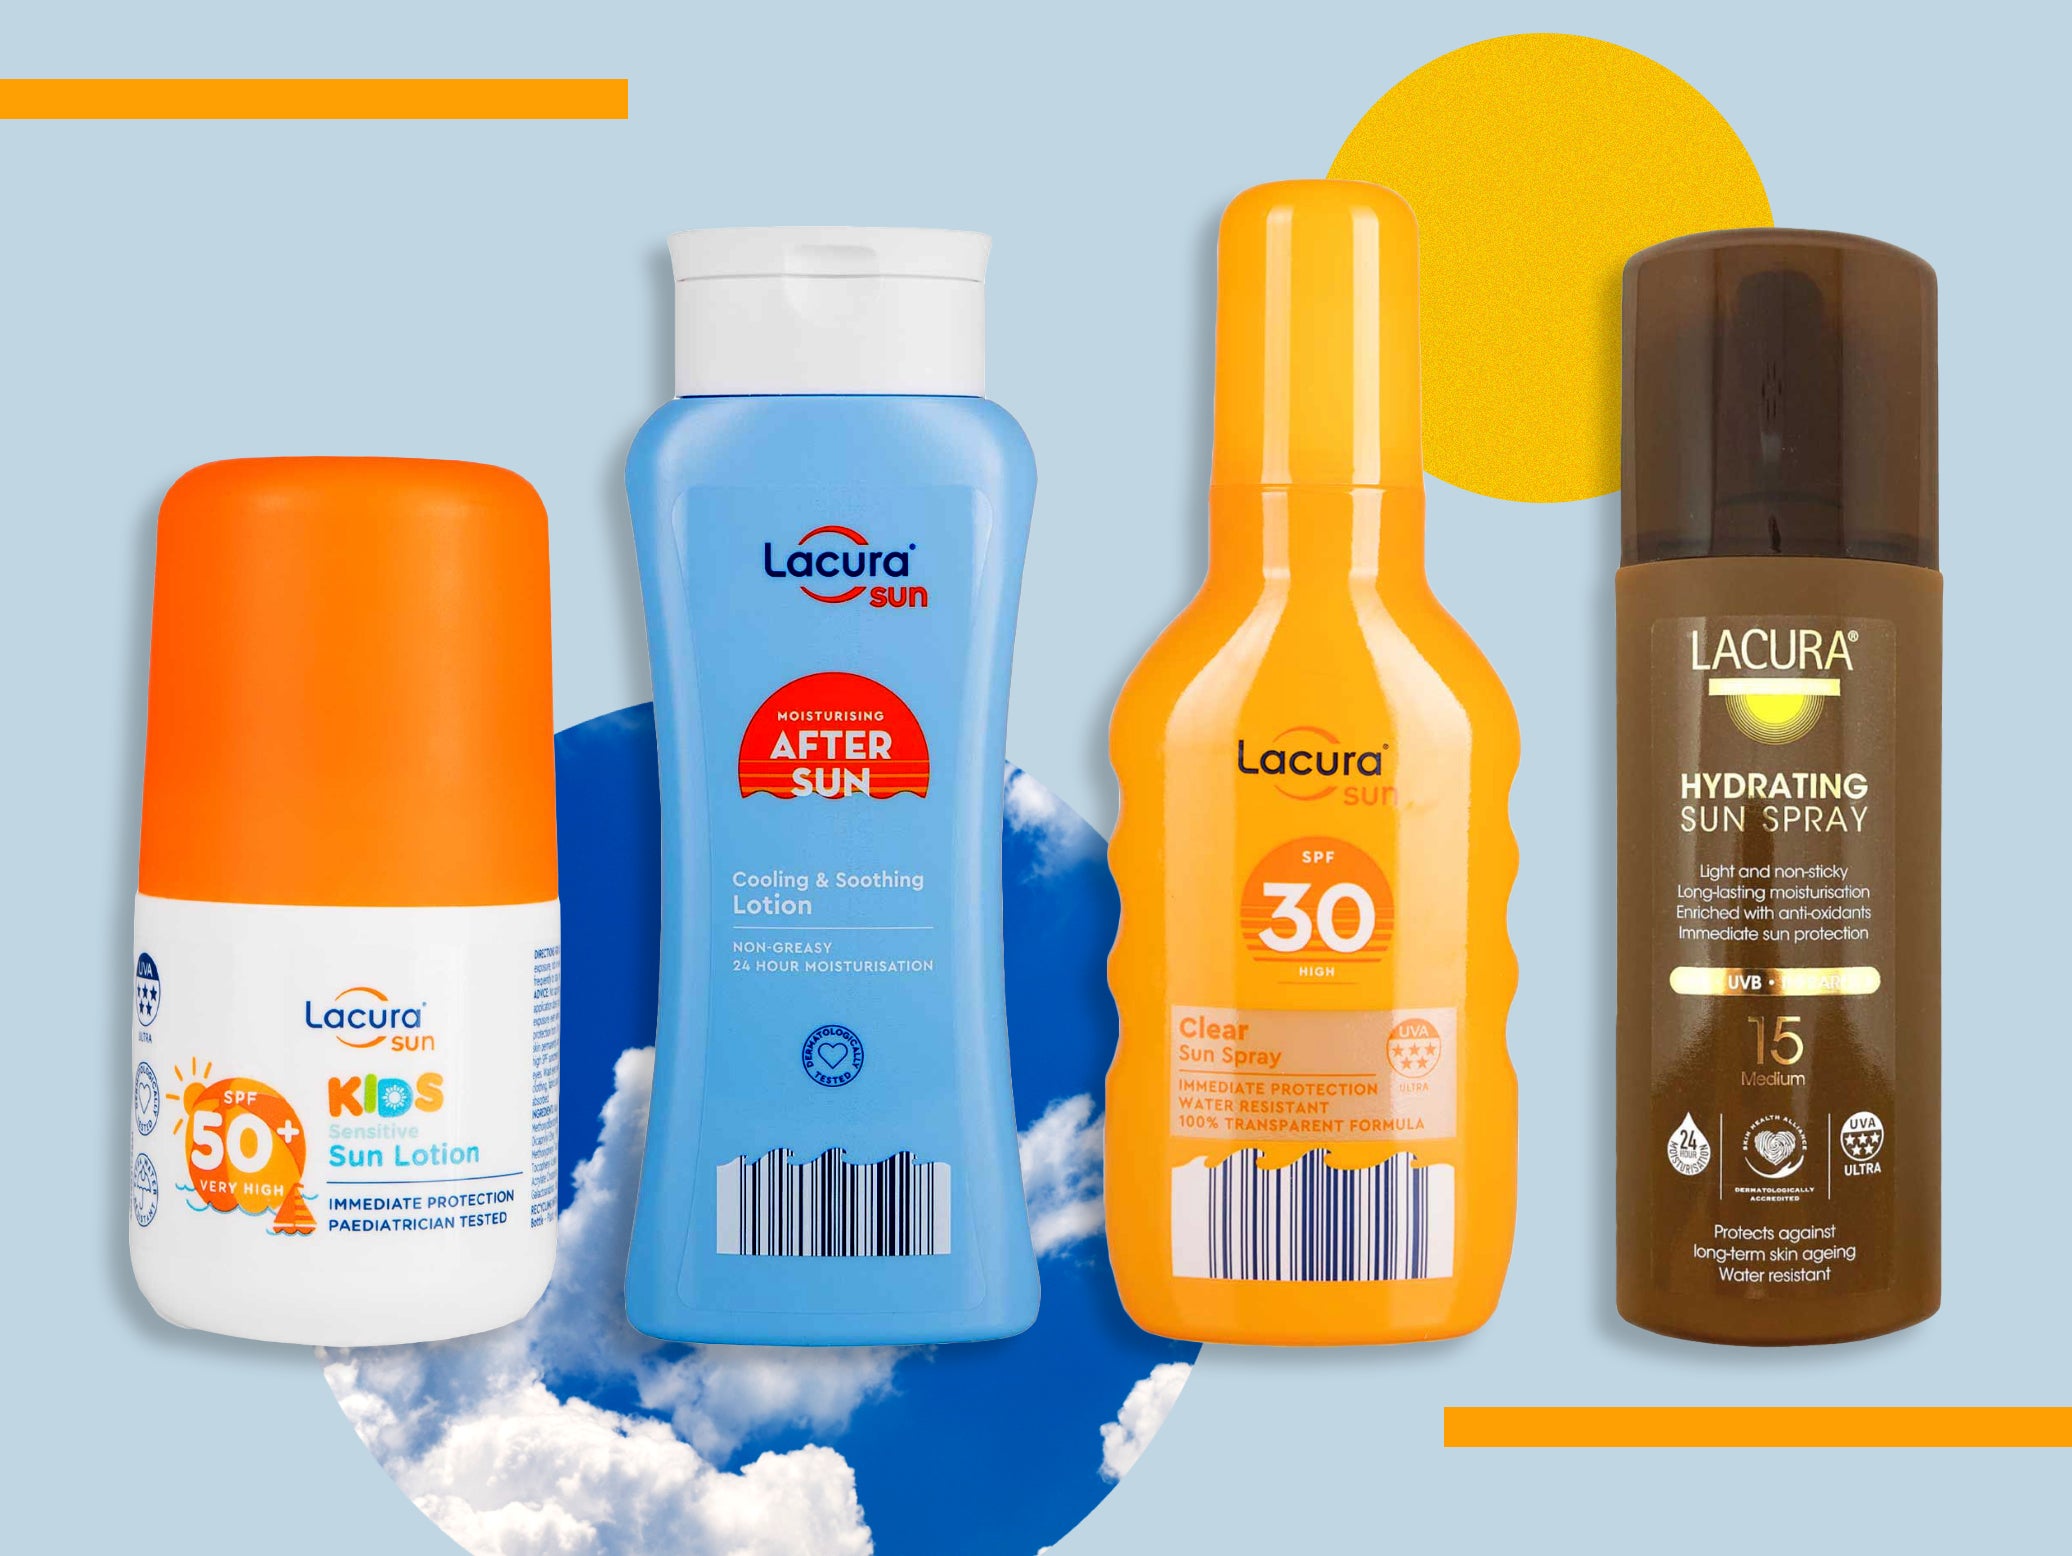 Keeping yourself and the family sun-safe with the daily essentials can rack up in costs – luckily, Aldi’s new range is both protective and purse-friendly